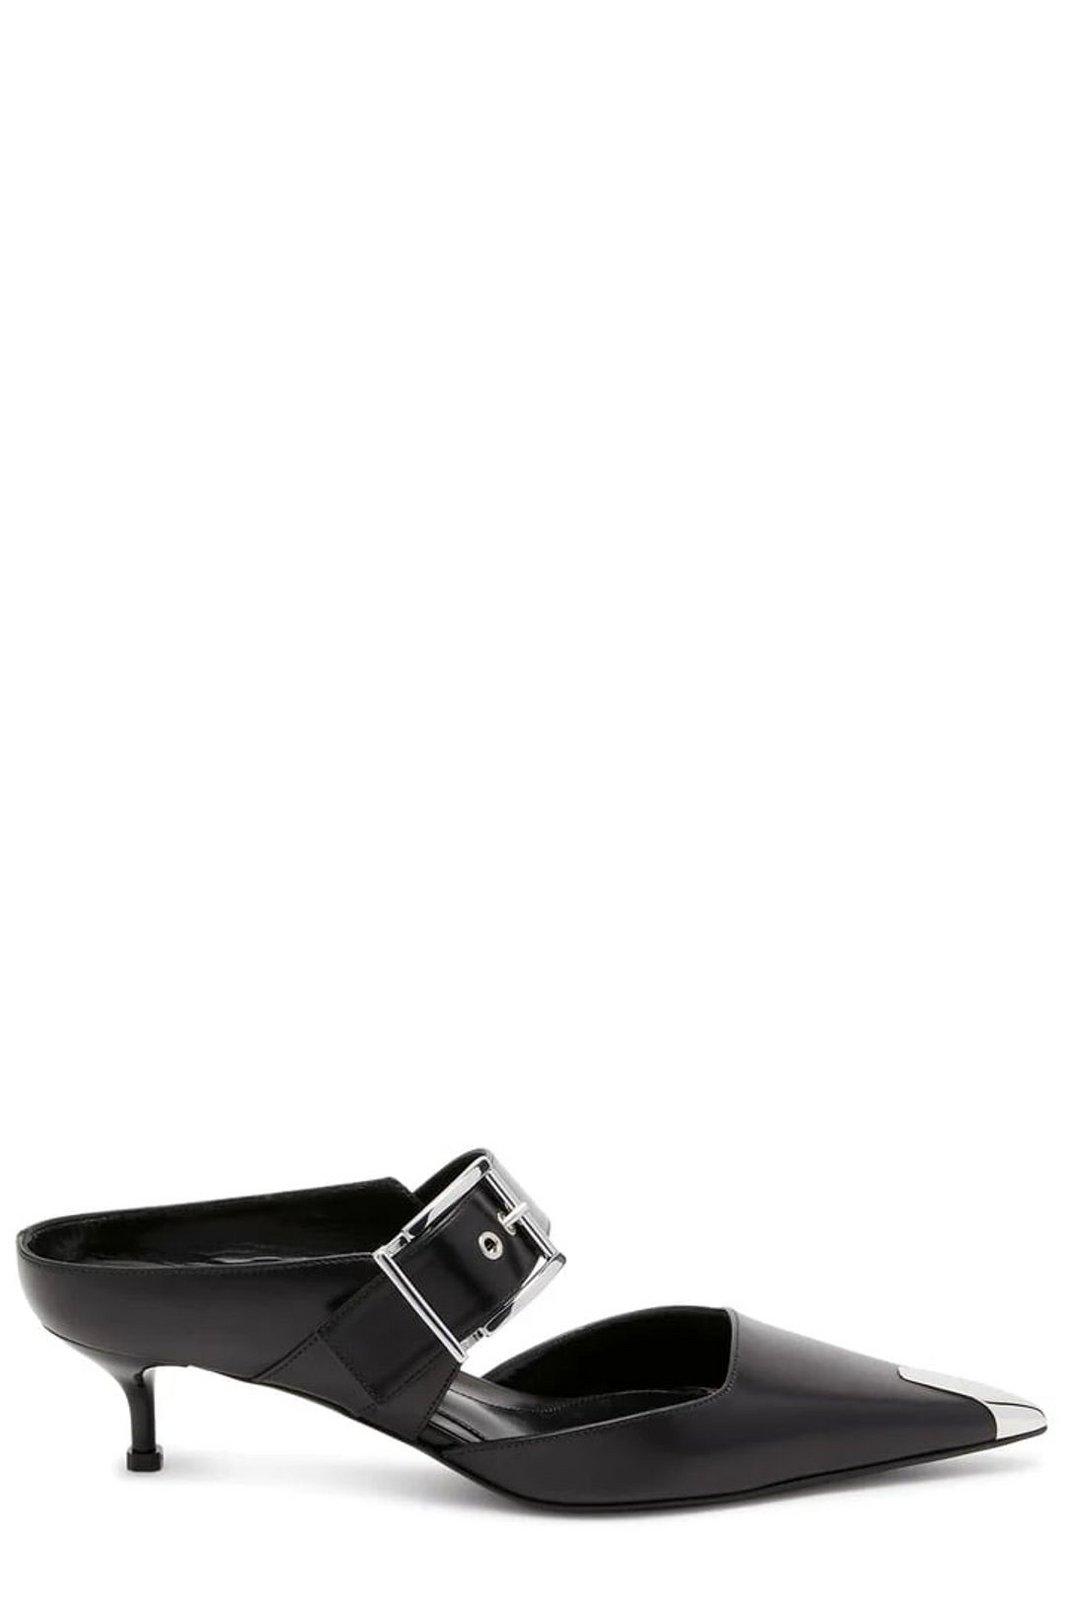 ALEXANDER MCQUEEN PUNK BUCKLE POINTED TOE MULES